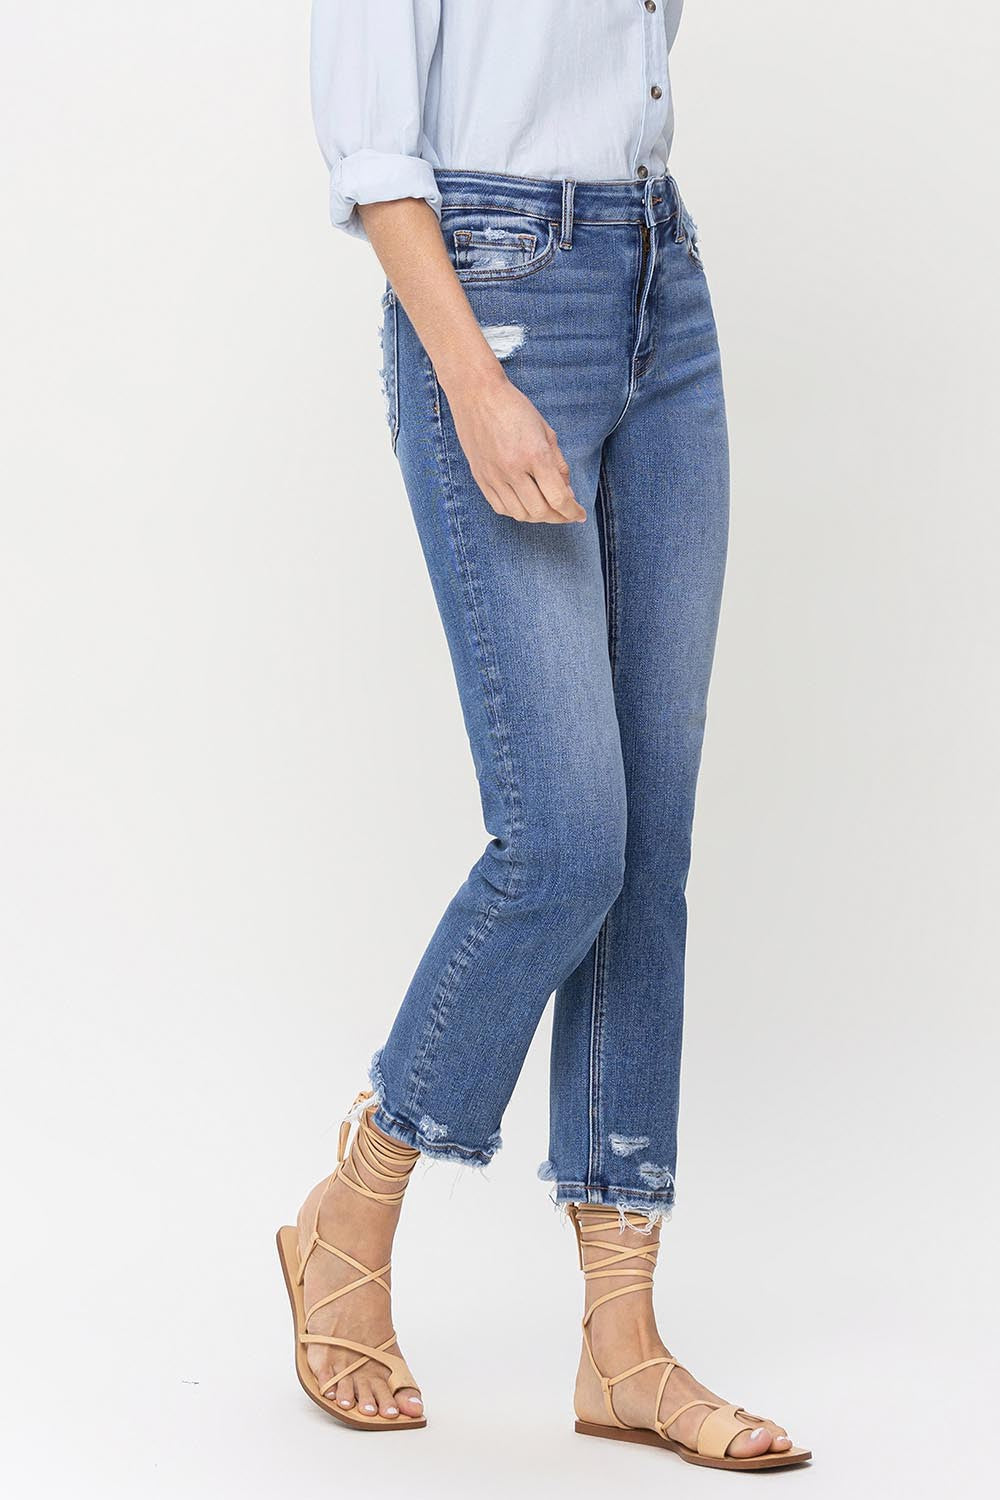 The High Rise Raw Hem Straight Jeans are a stylish and versatile choice. With their high-rise fit, they provide a flattering silhouette. The raw hem adds a trendy and edgy touch to any outfit. Made from high-quality denim, they are durable and comfortable to wear. These jeans are perfect for both casual and dressier occasions.  24 - 32